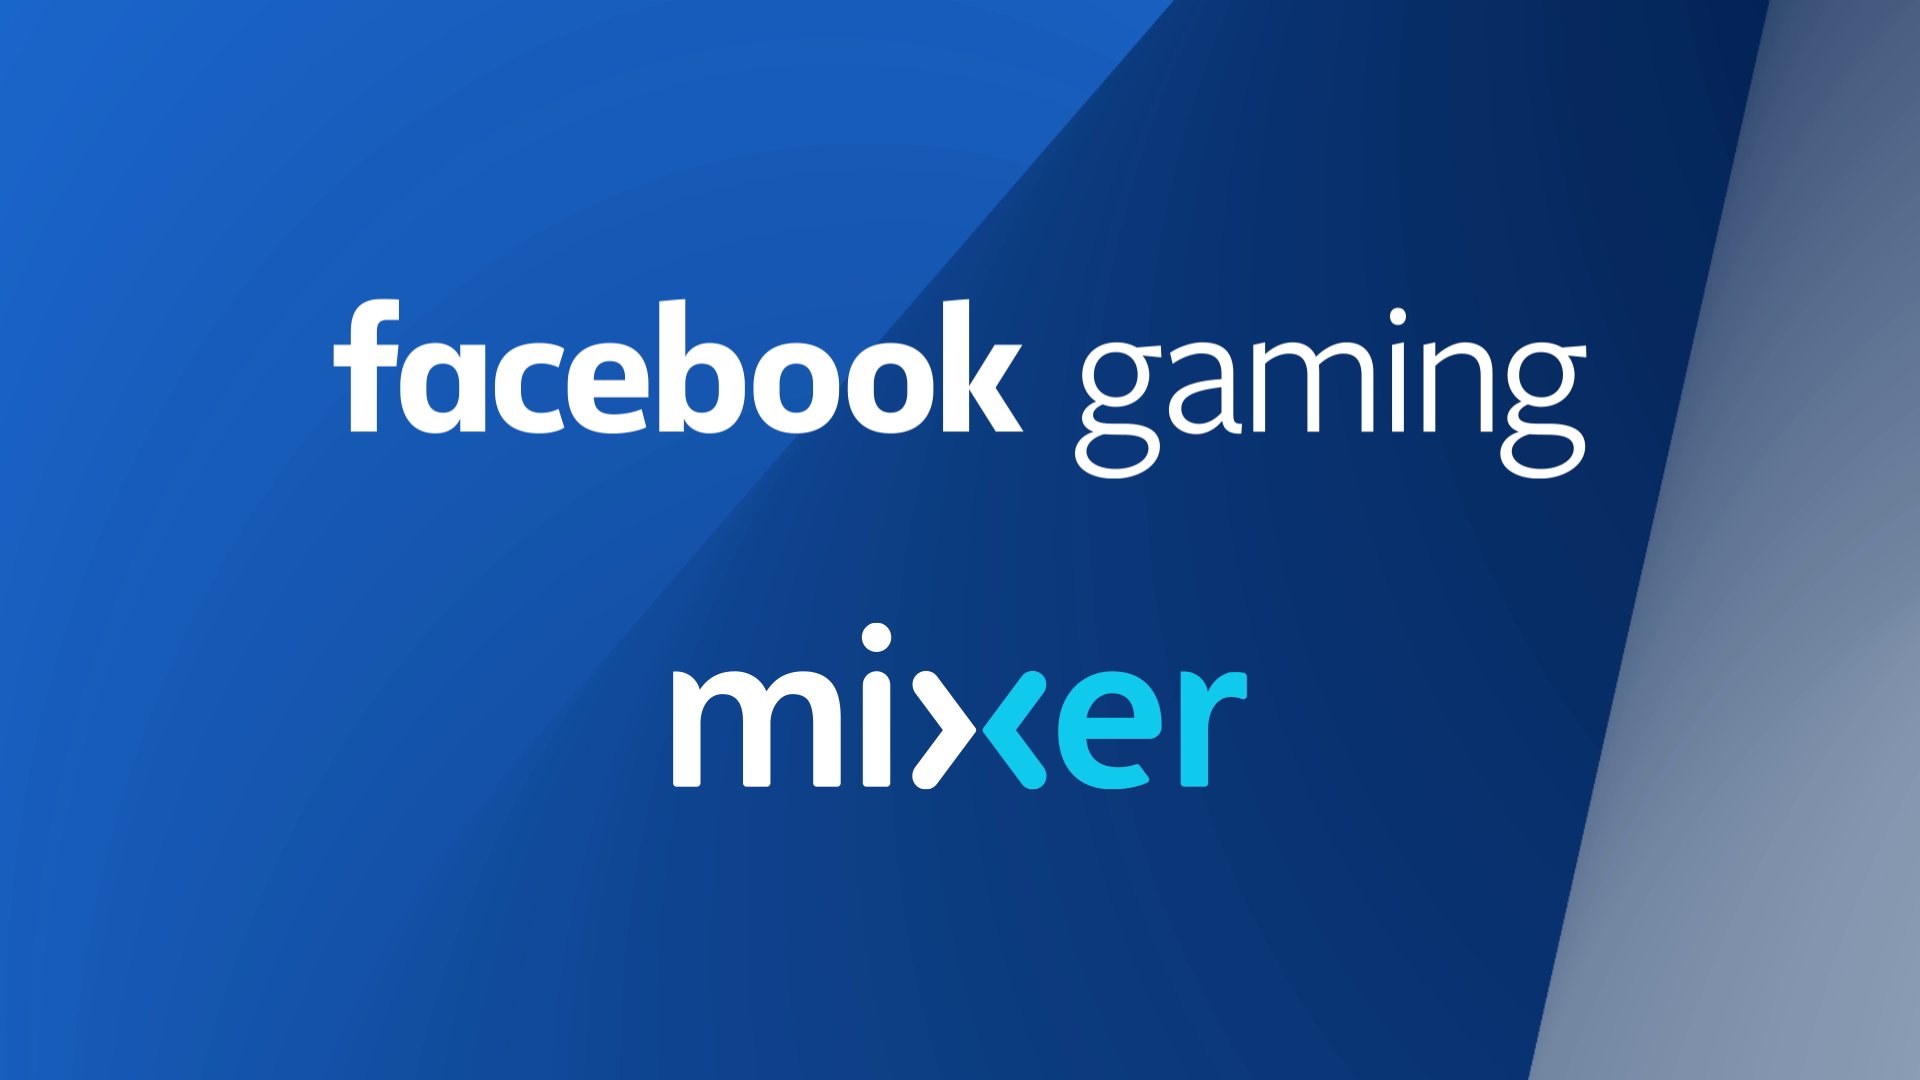 Mixer Is Shutting Down And Transitioning To Facebook Gaming